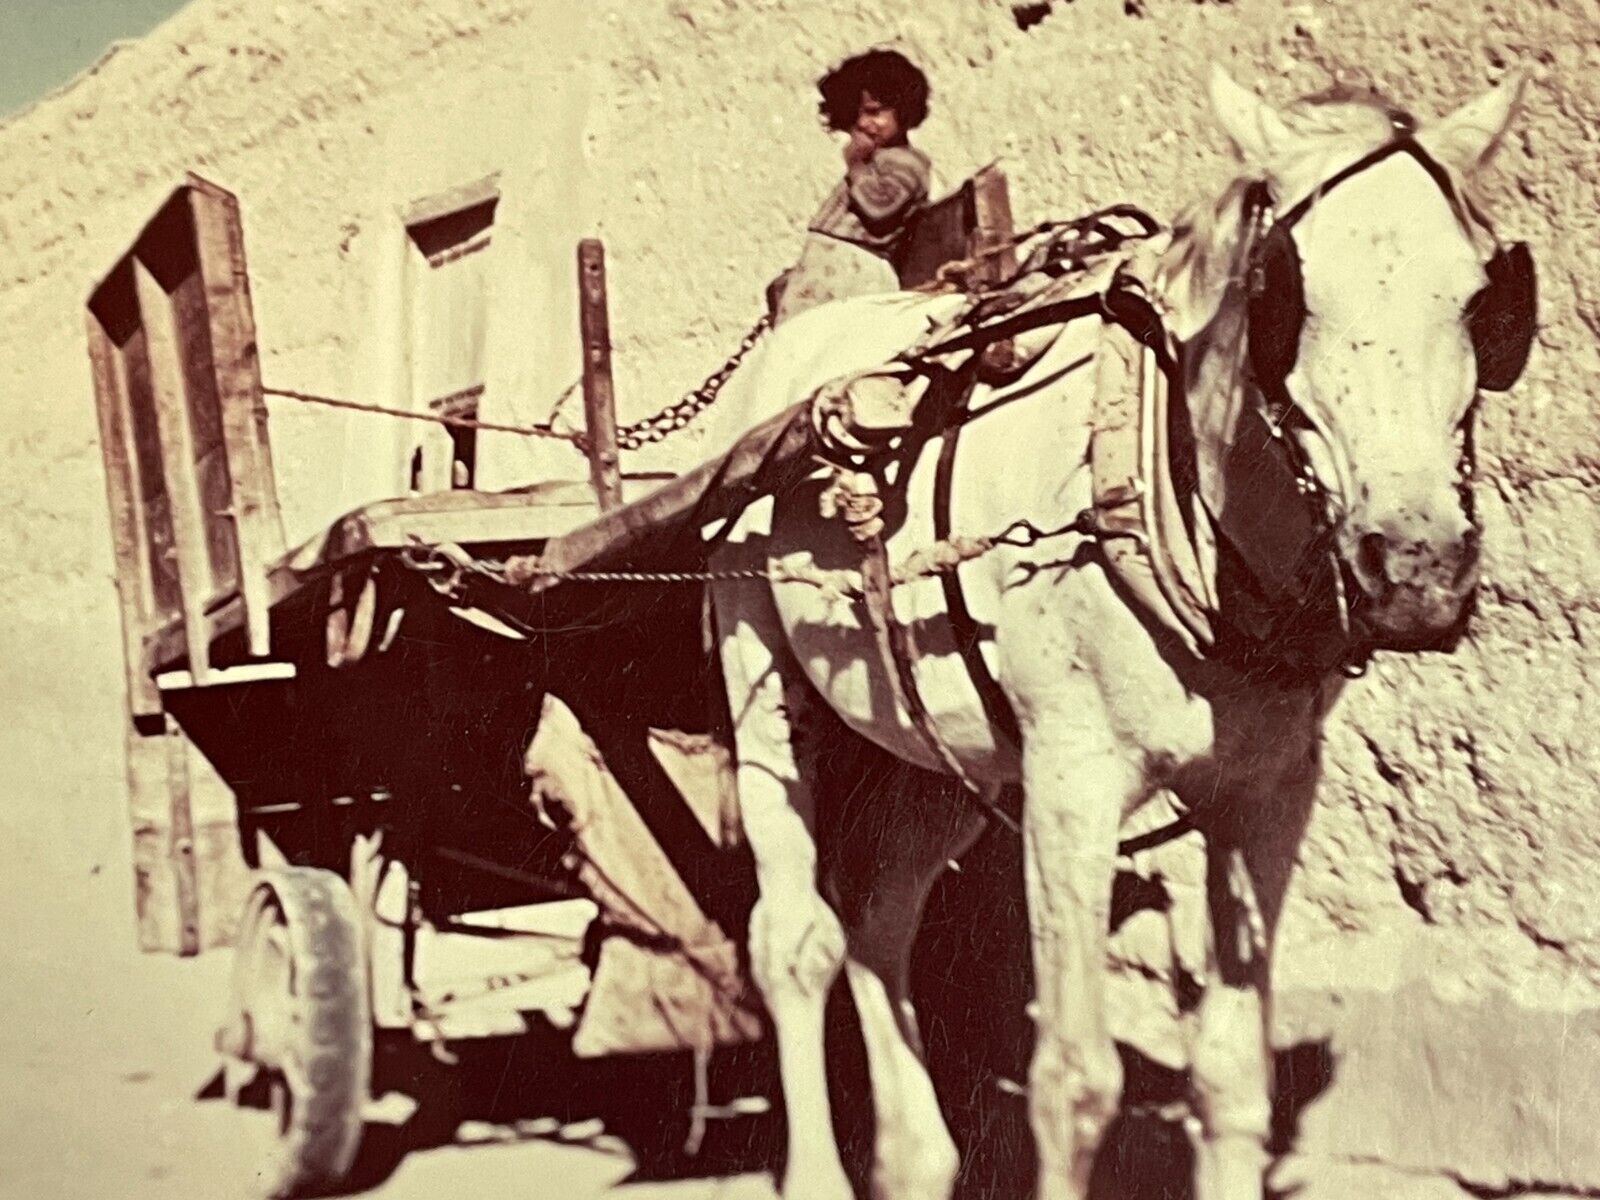 FI Photograph Girl Alone On Horse Cart 1960\'s Middle East Artistic